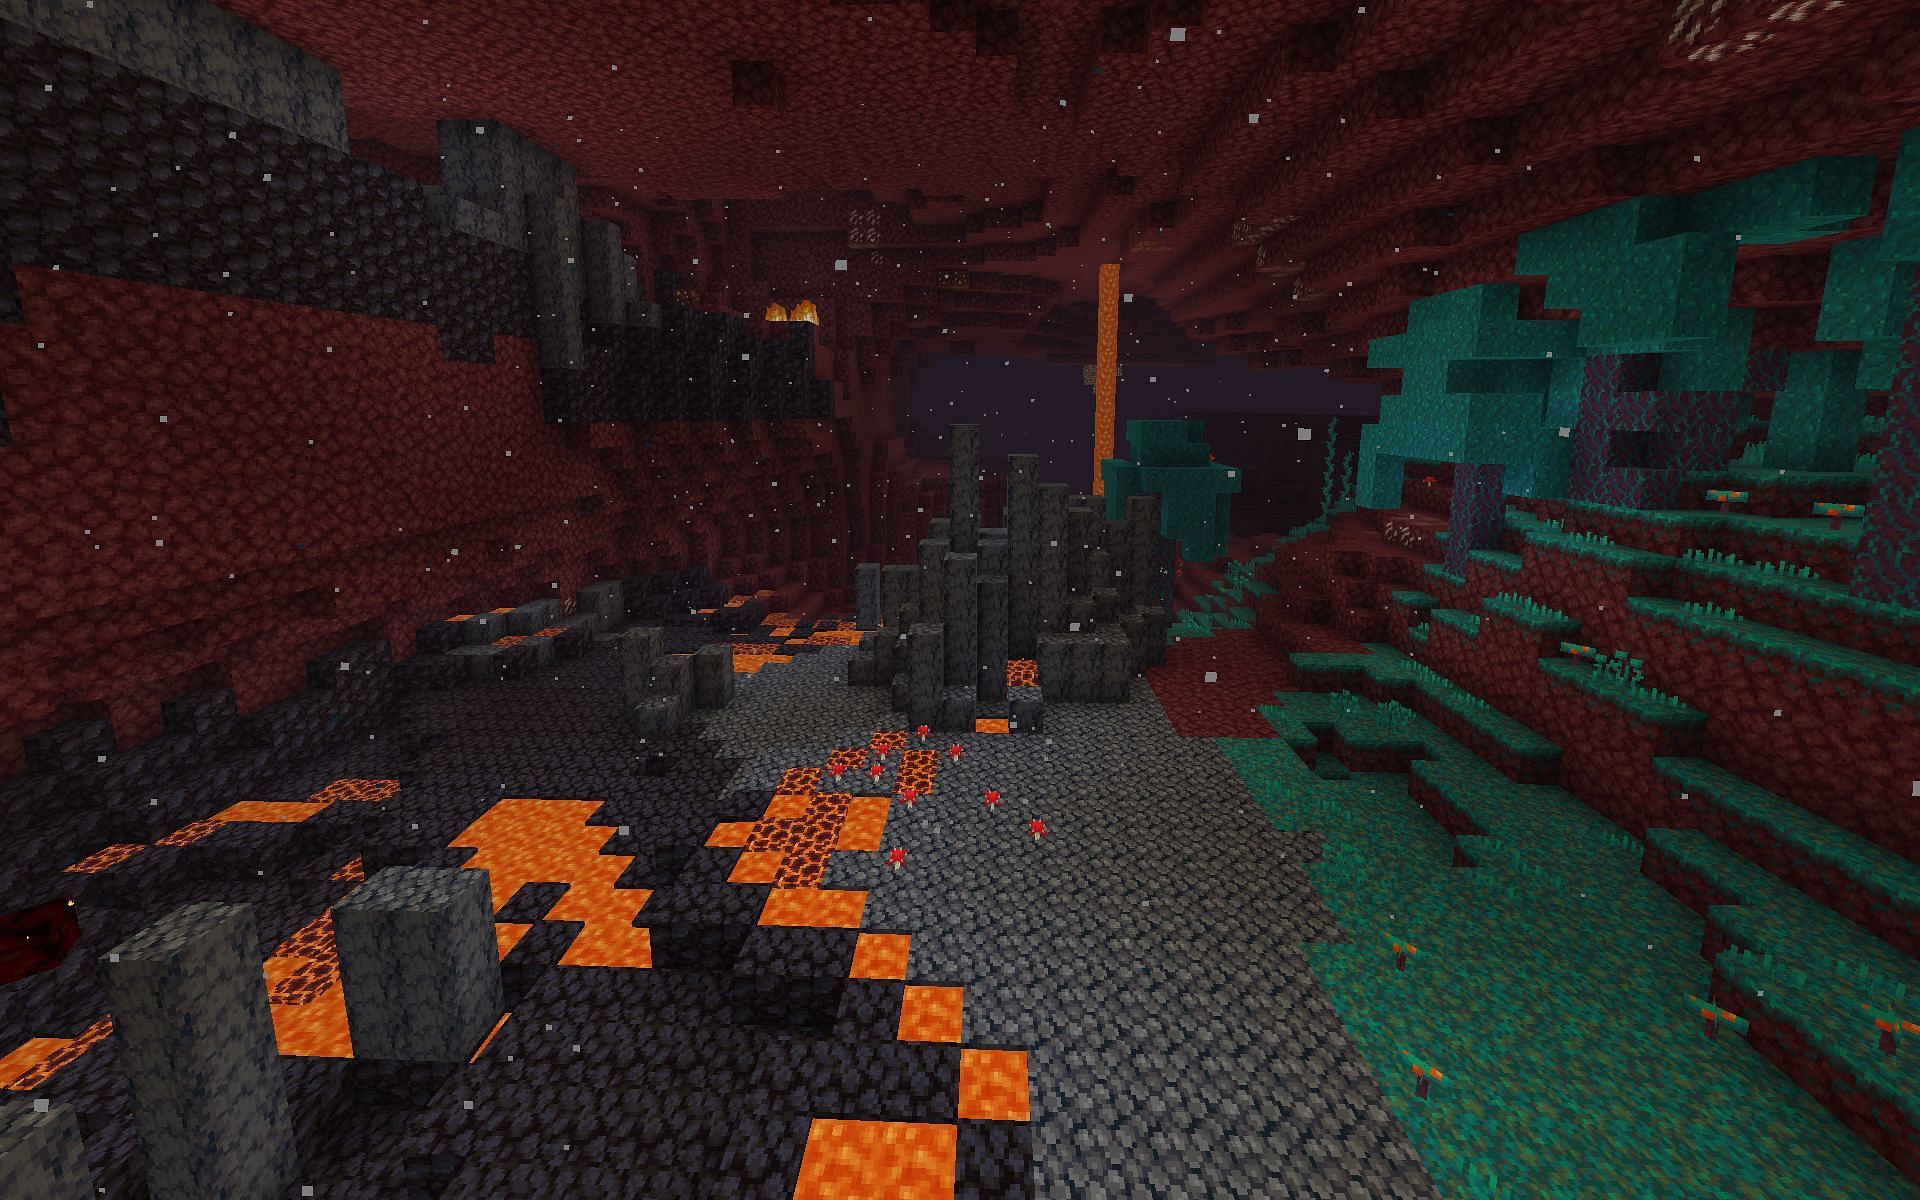 Basalt Deltas and Warped Forest in the Nether (Image via Mojang)